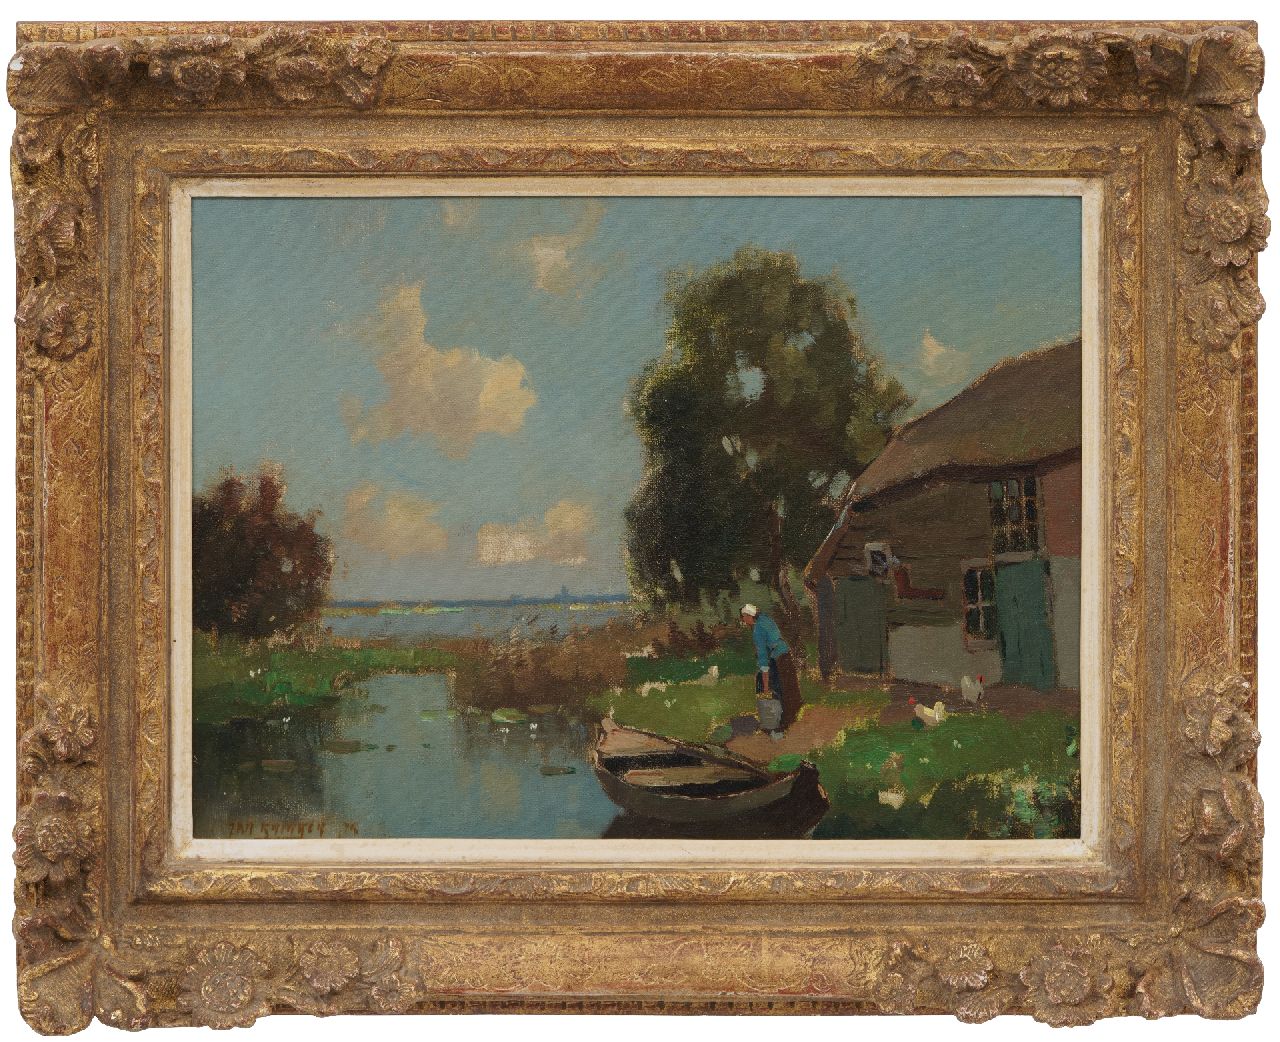 Knikker jr. J.S.  | 'Jan' Simon  Knikker jr. | Paintings offered for sale | Farmyard on a lake, oil on canvas 30.5 x 40.4 cm, signed l.l. and dated '75